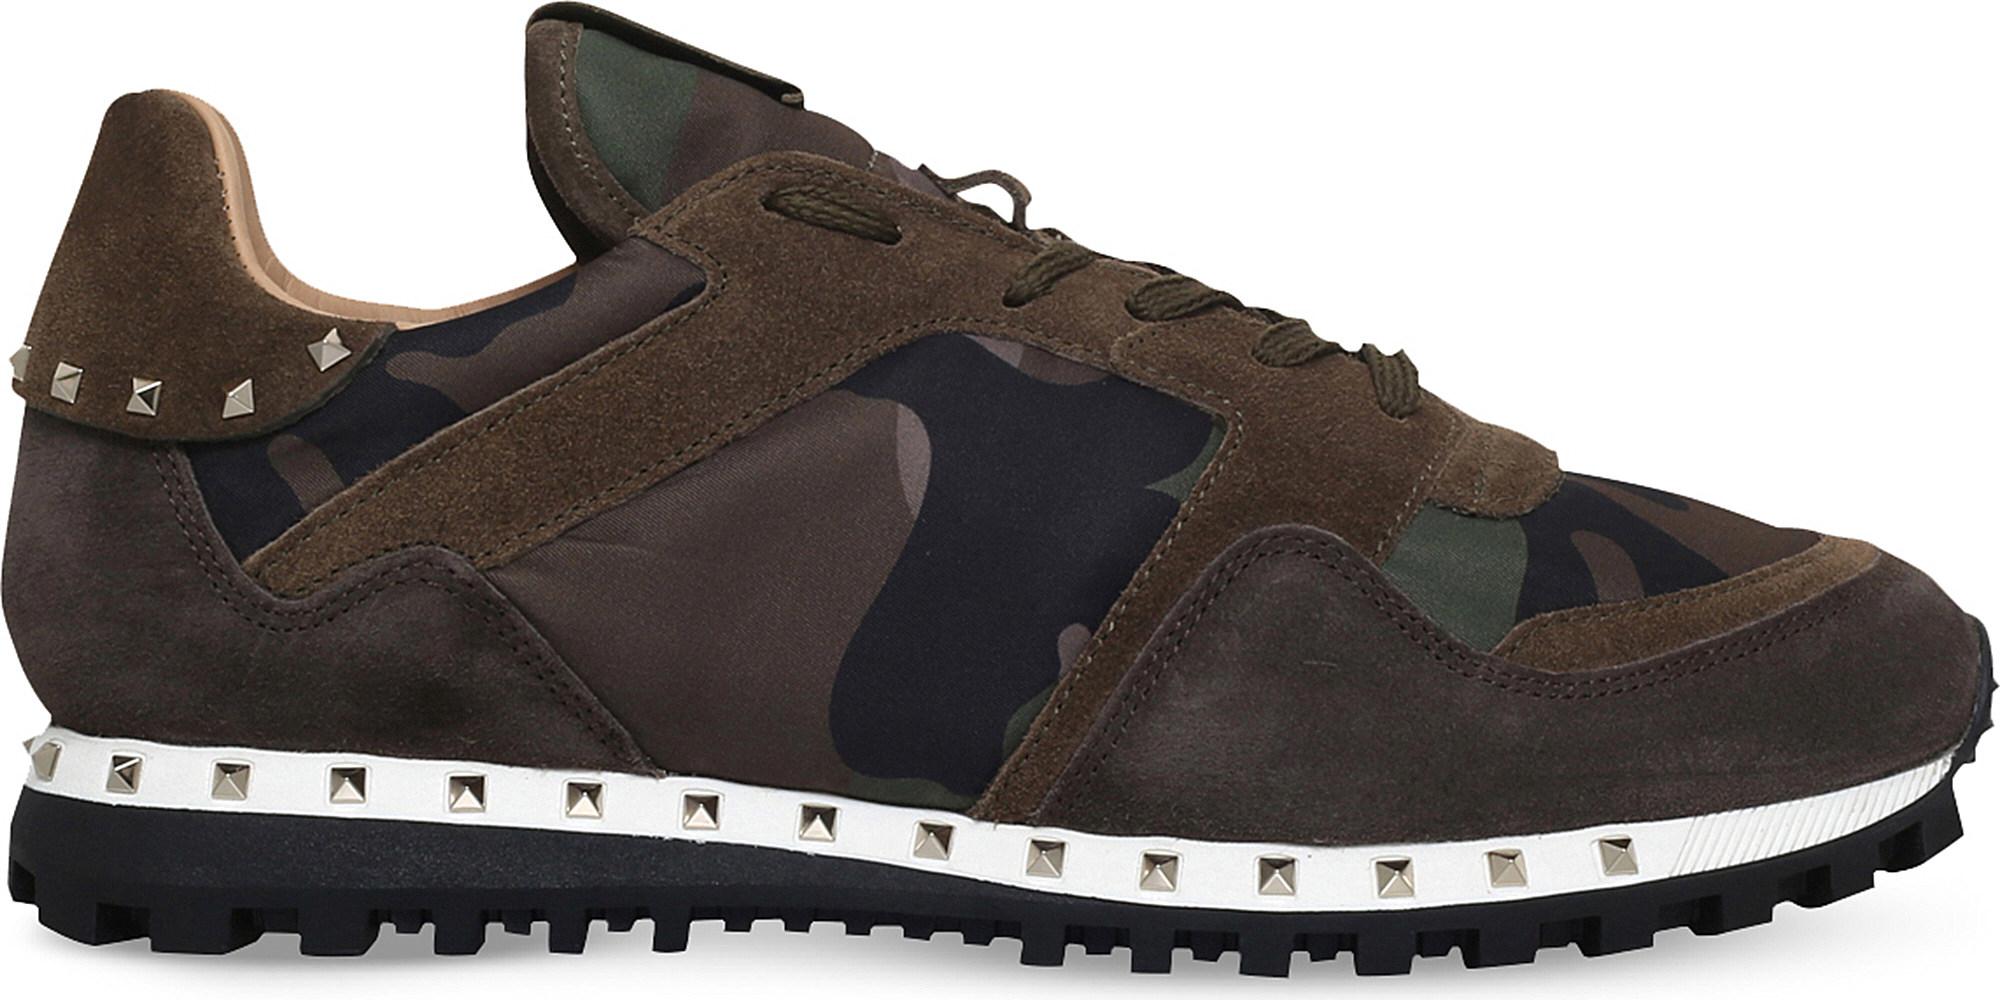 Lyst - Valentino Rockstud Studded Camo Suede Trainers in Black for Men